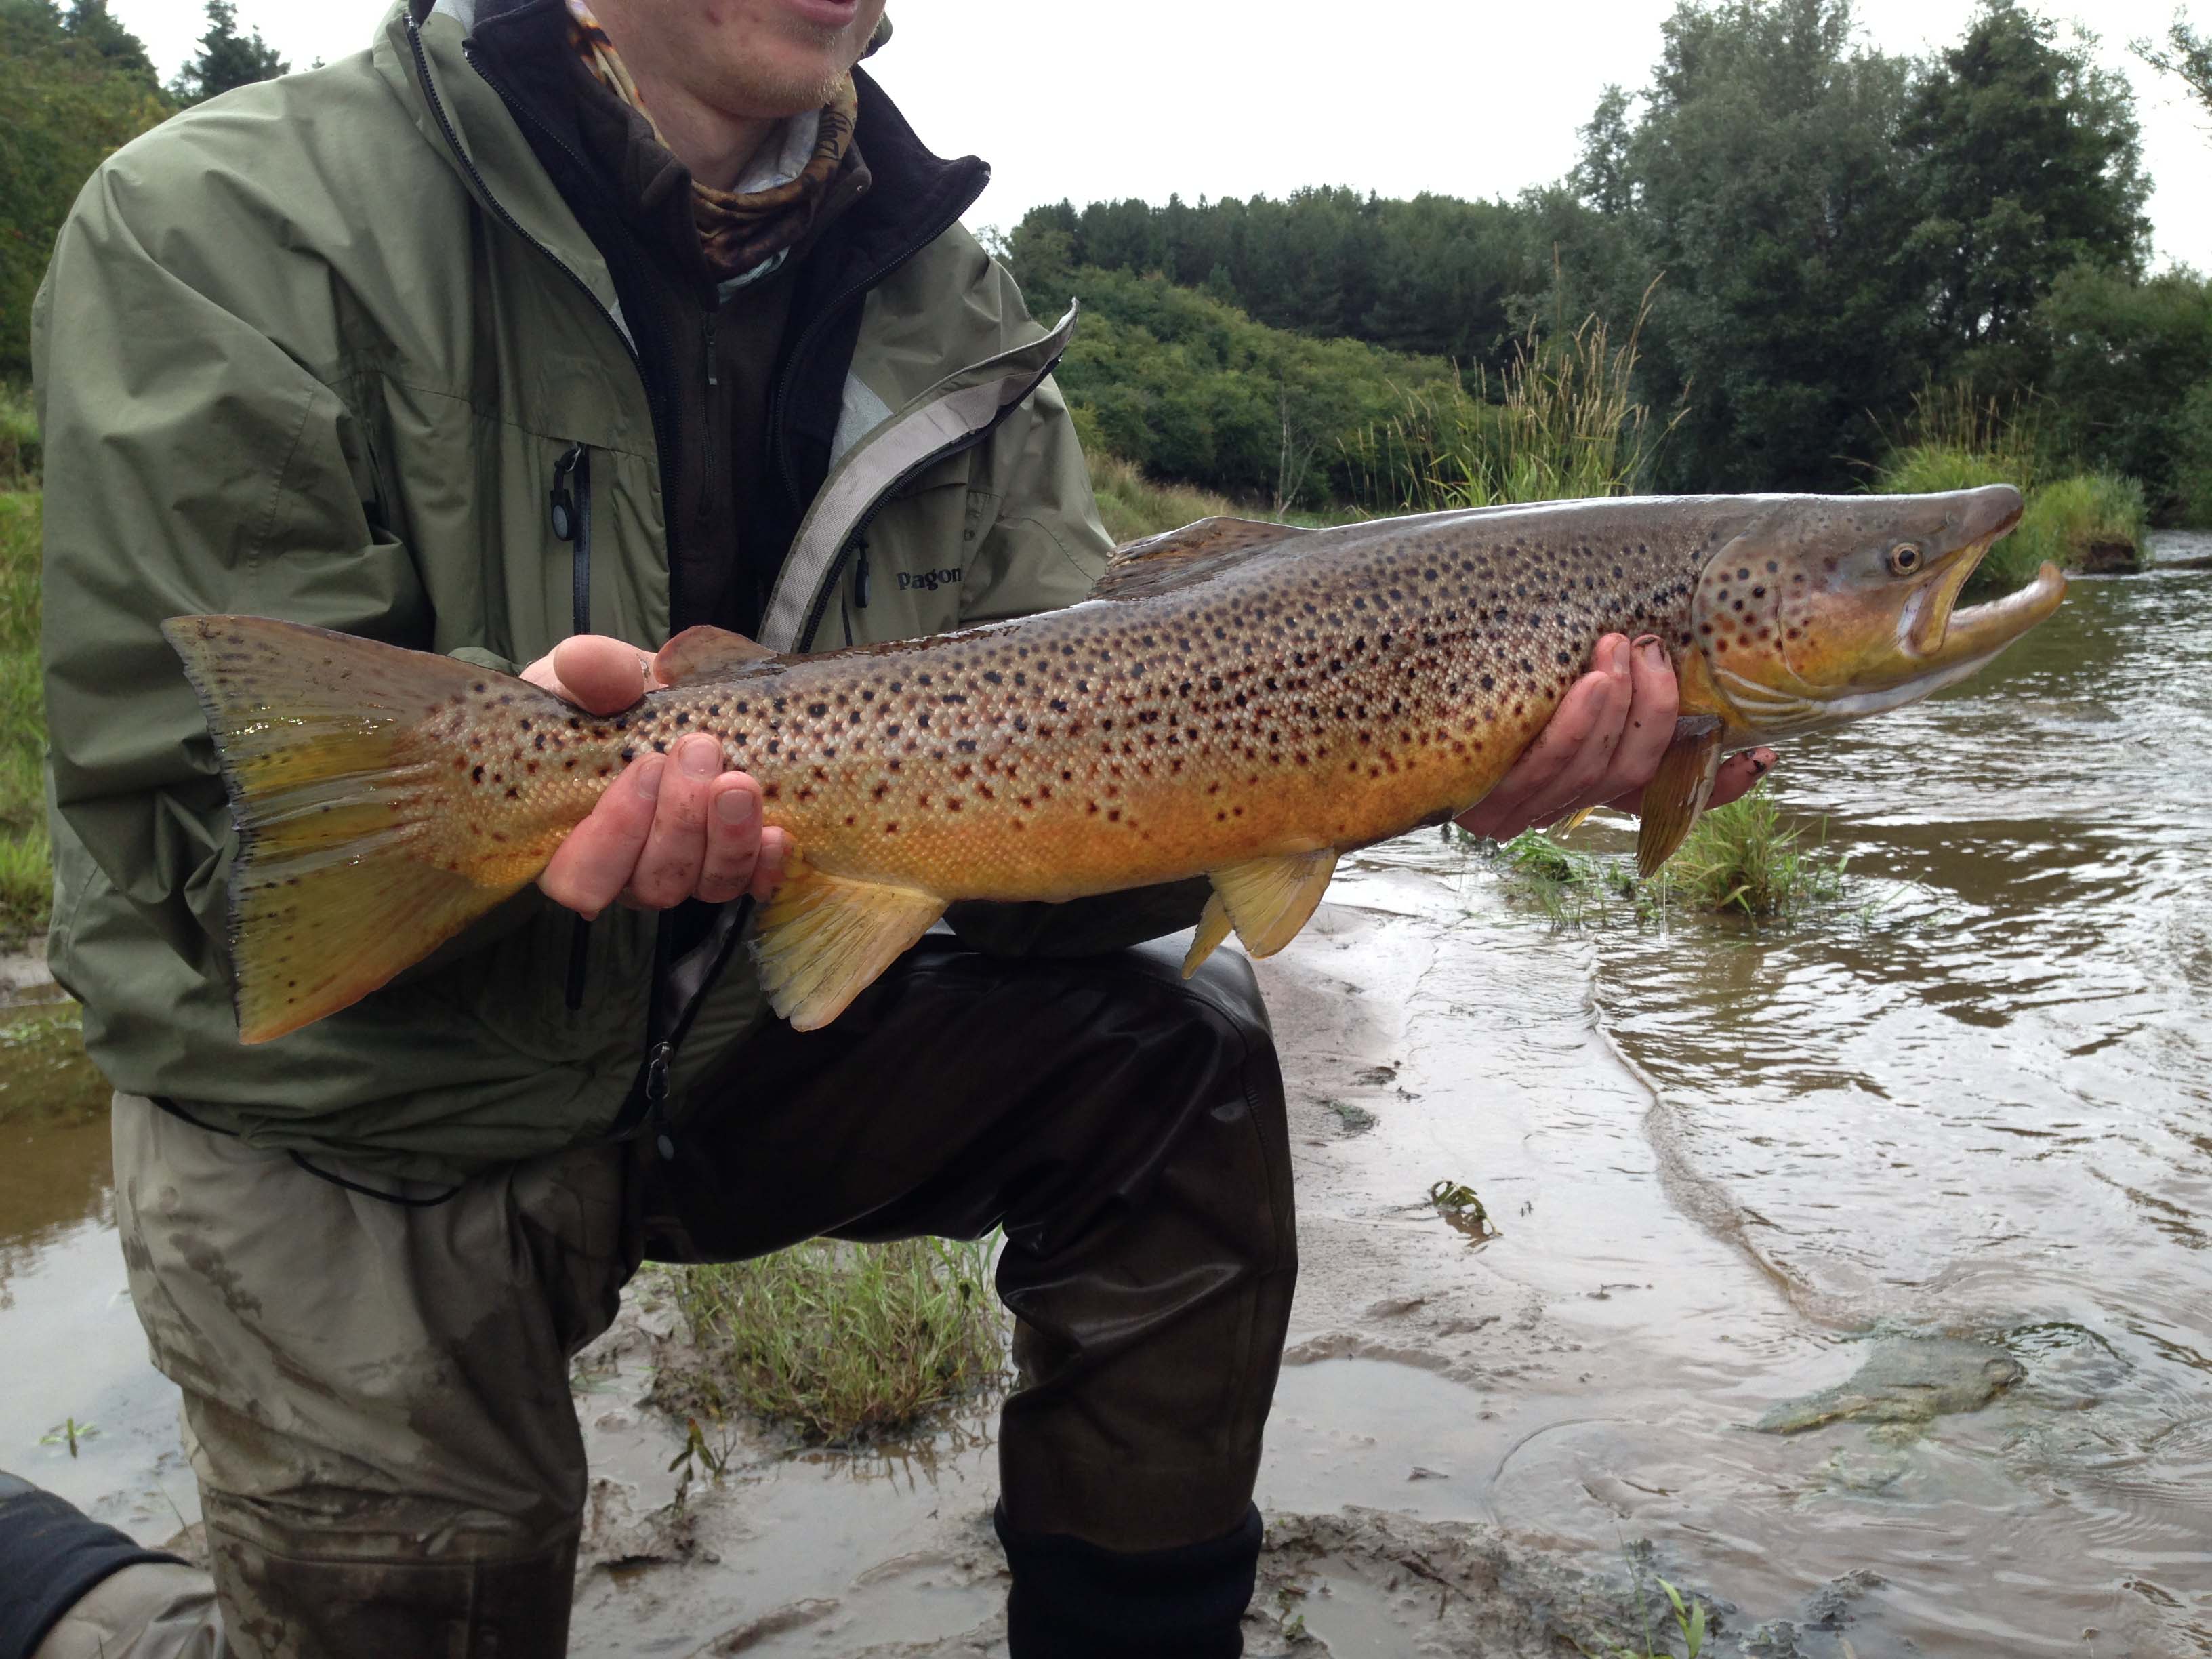 Fly Fishing Trips & Fishing Holidays in Northumberland and the Scottish Borders